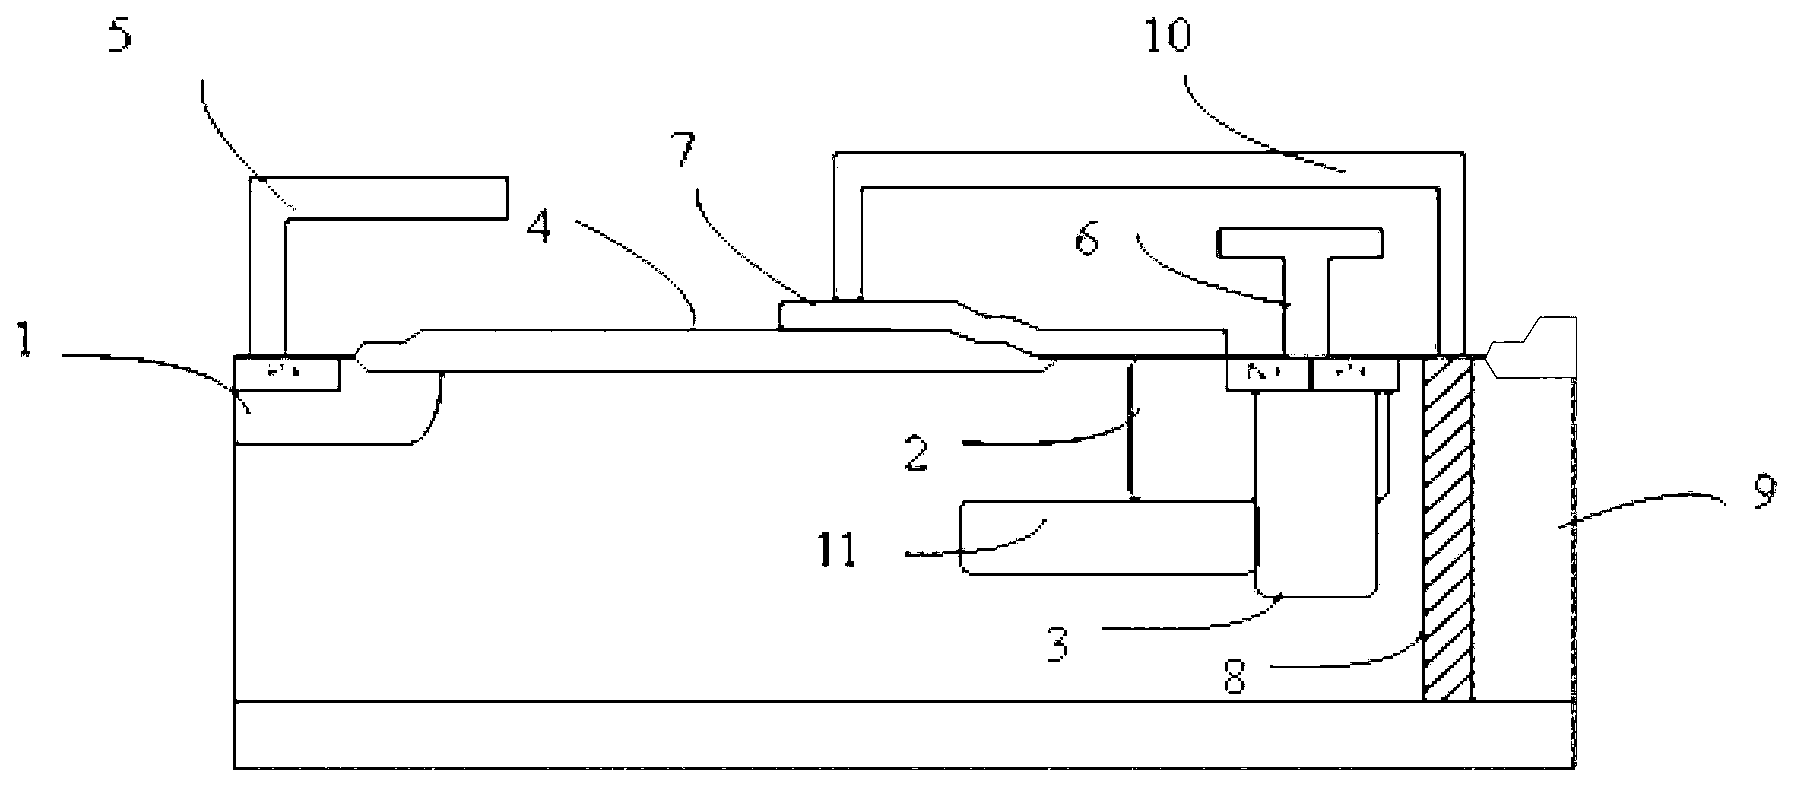 Double-gate SOI-LIGBT device with P-type buried layer